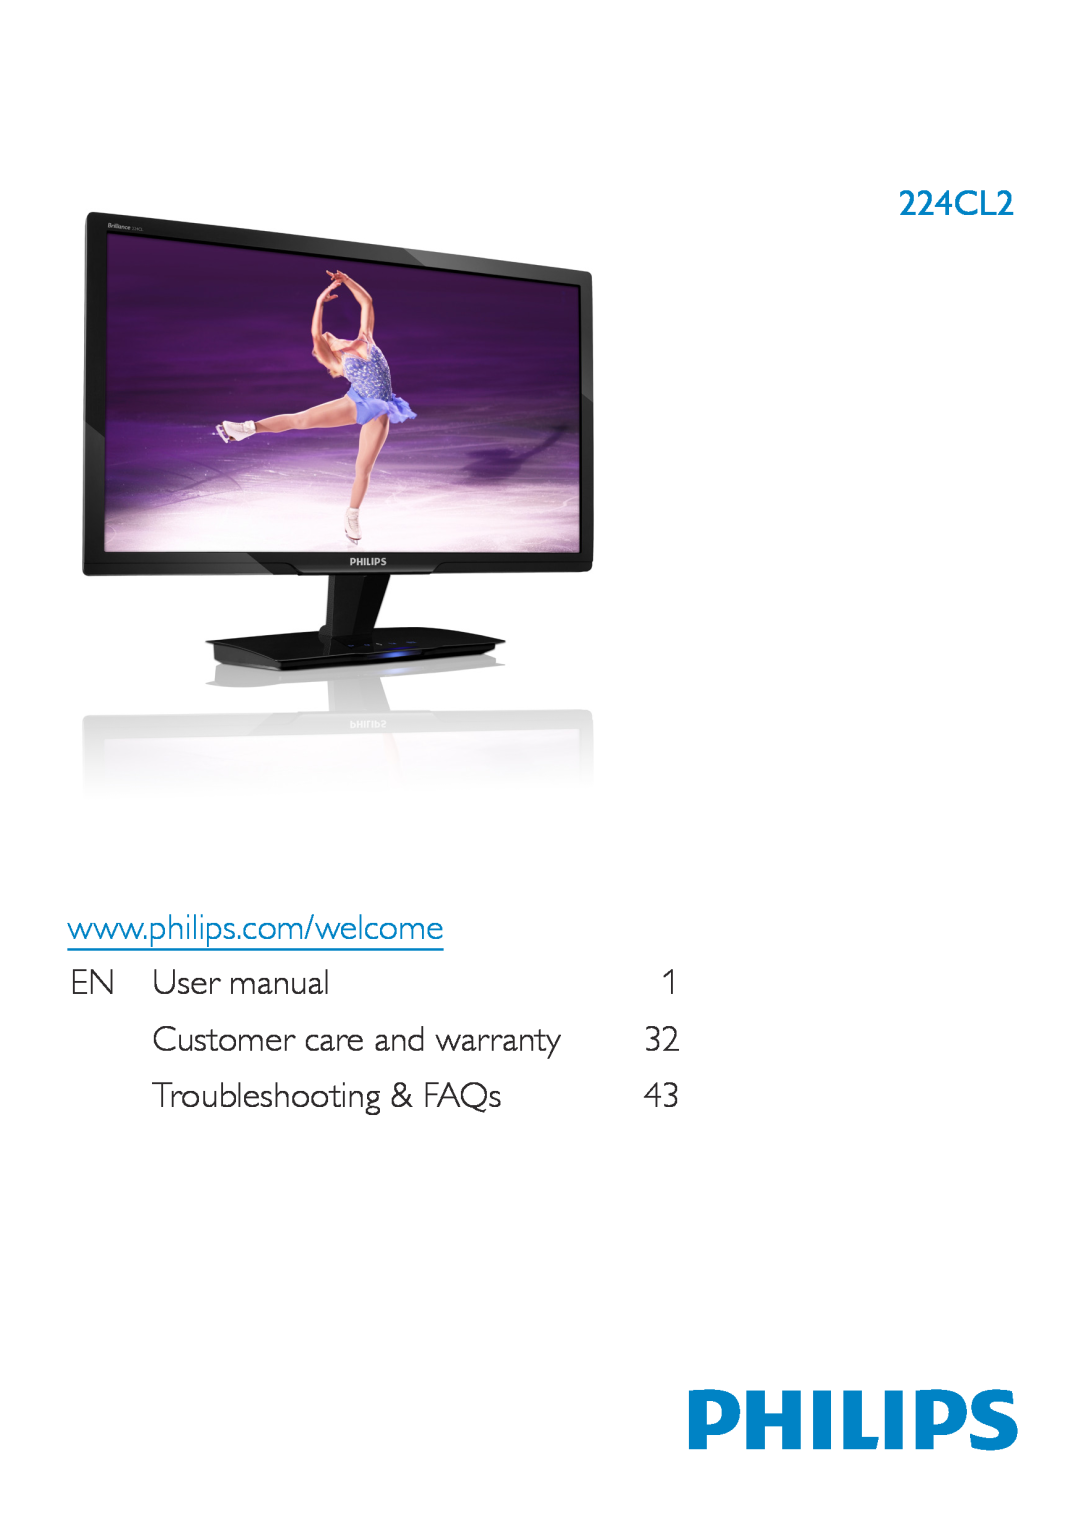 Philips 224CL2 user manual EN User manual, Troubleshooting & FAQs, Customer care and warranty 